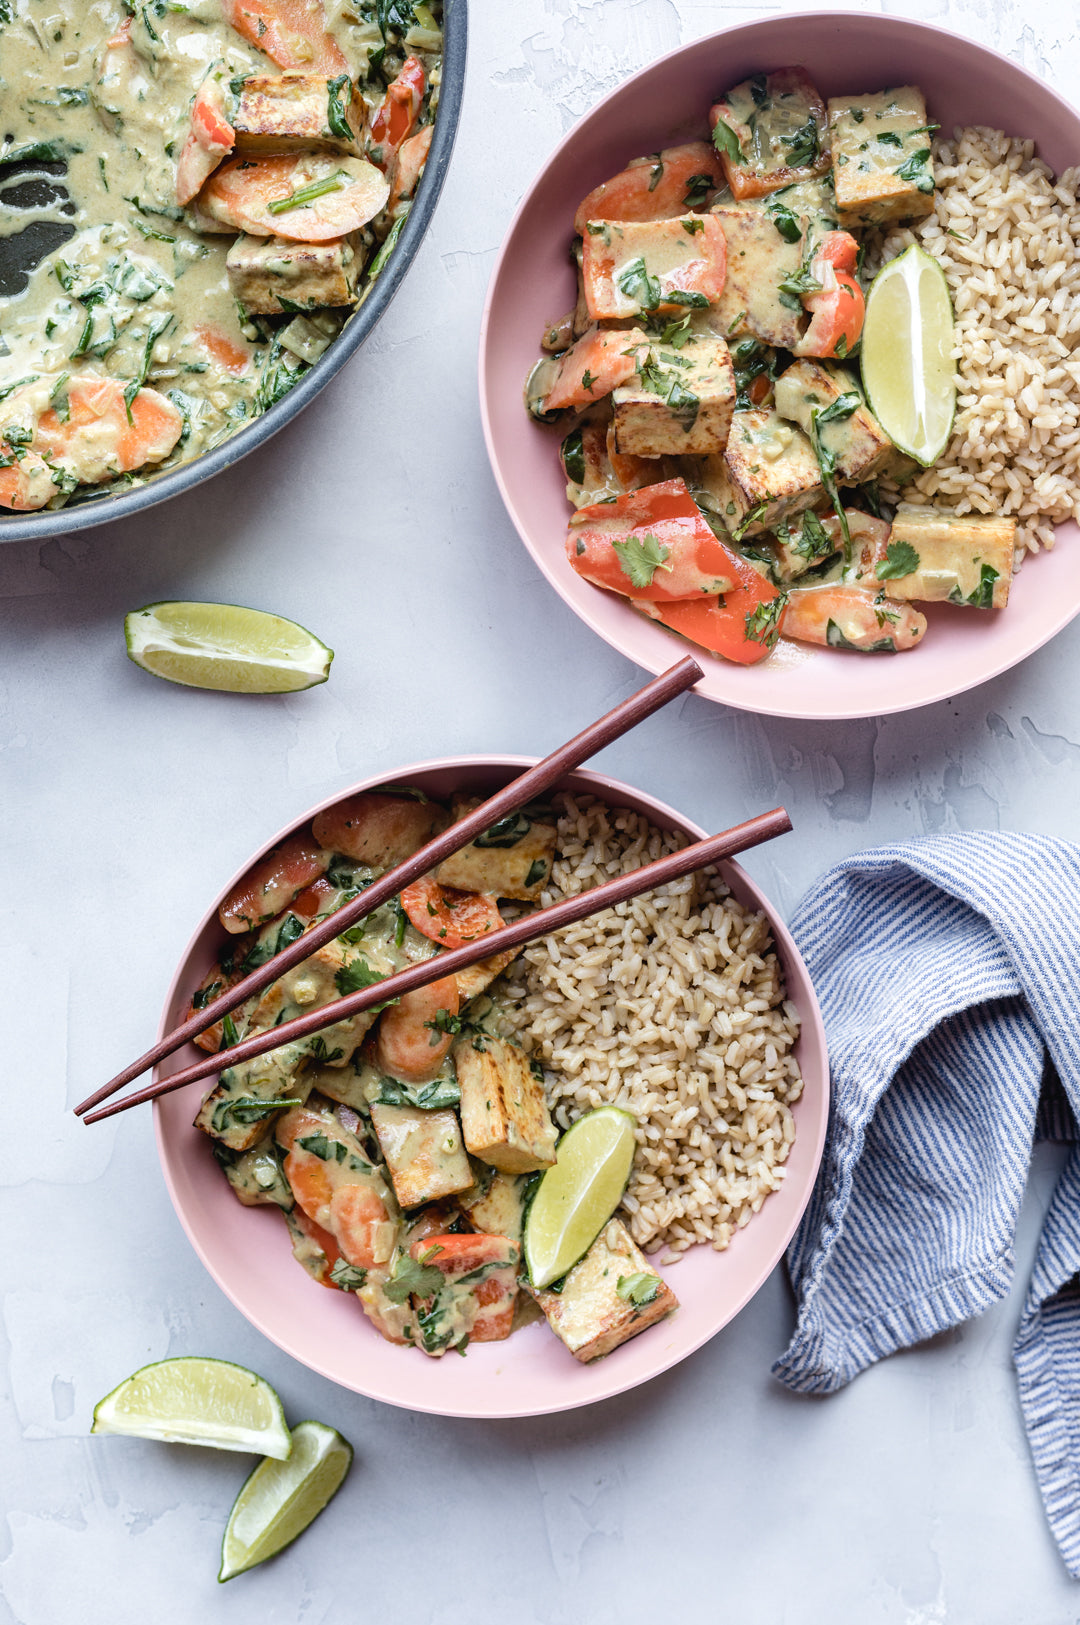 Curry In a Hurry (Thai Green Curry Tofu for Meal Prep)